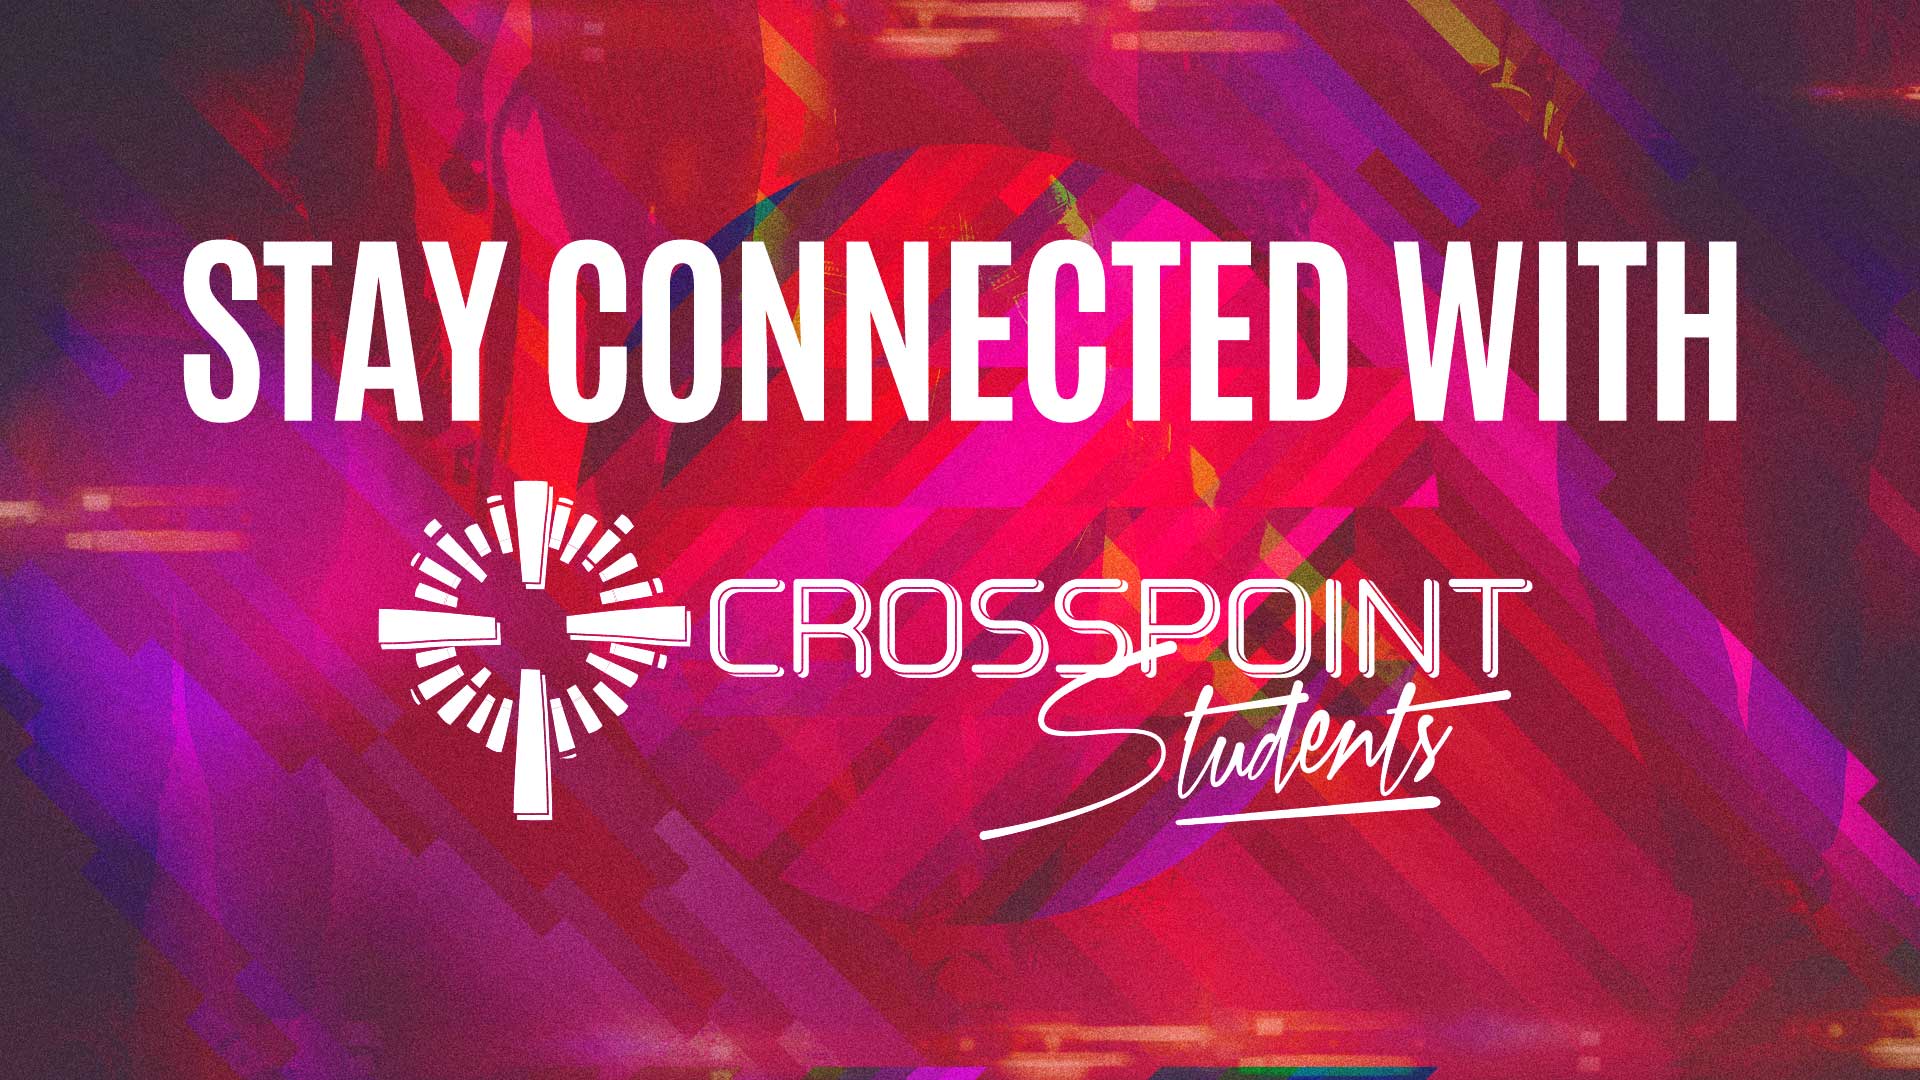 Stay Connected with Crosspoint Students